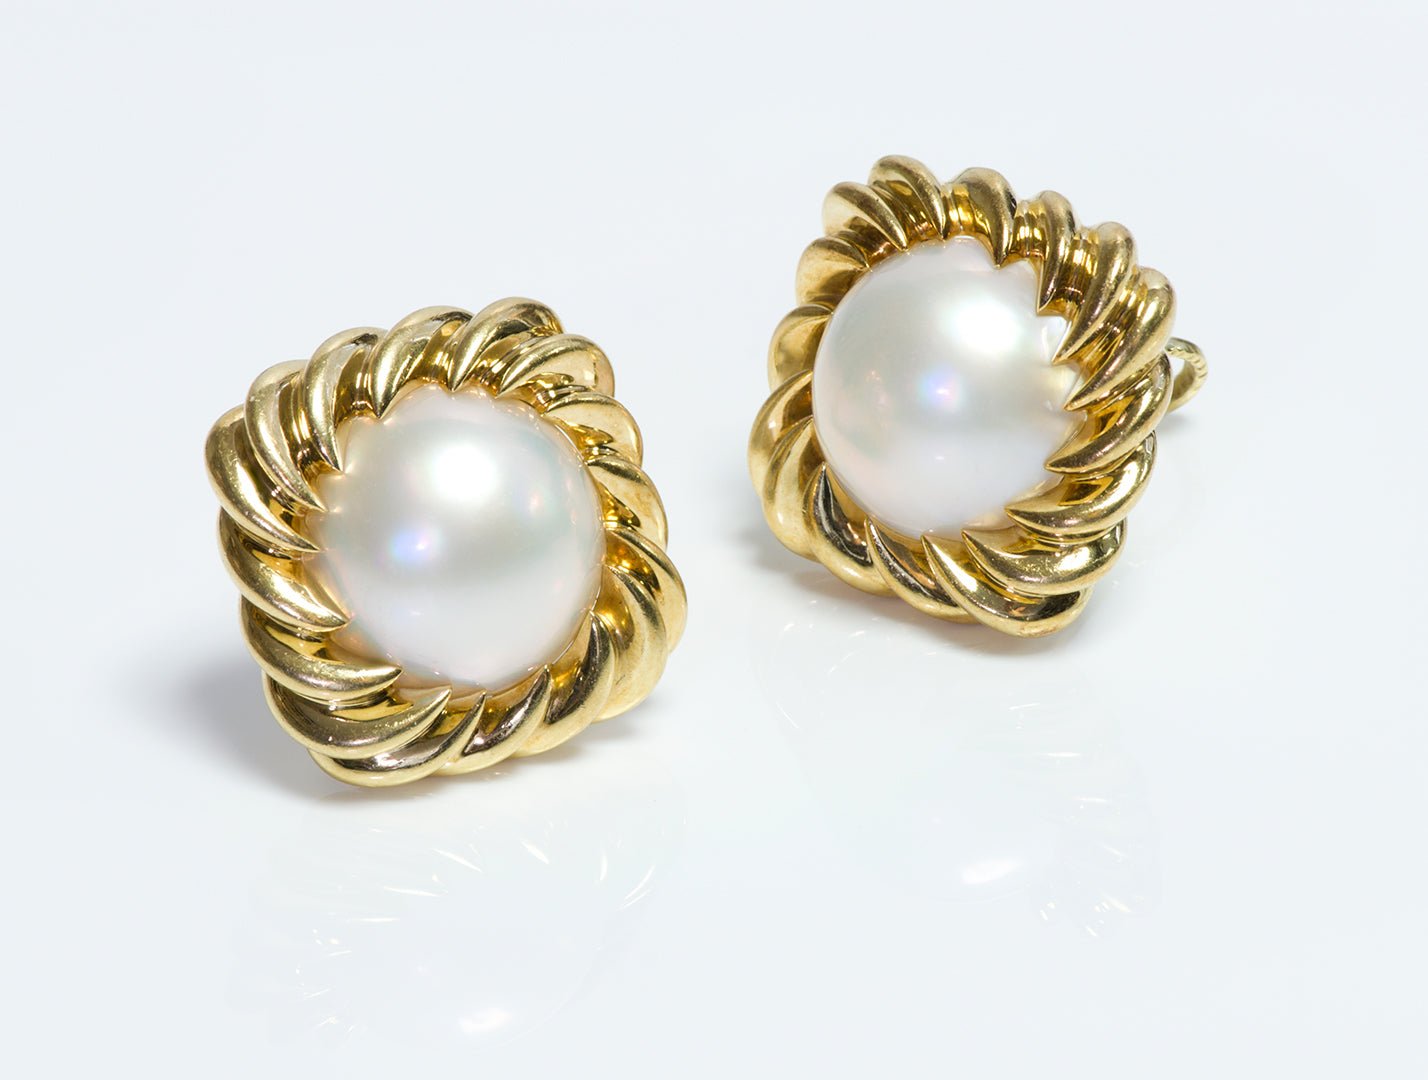 Vintage Tiffany & Co. 18K Gold Mabe Pearl Earrings